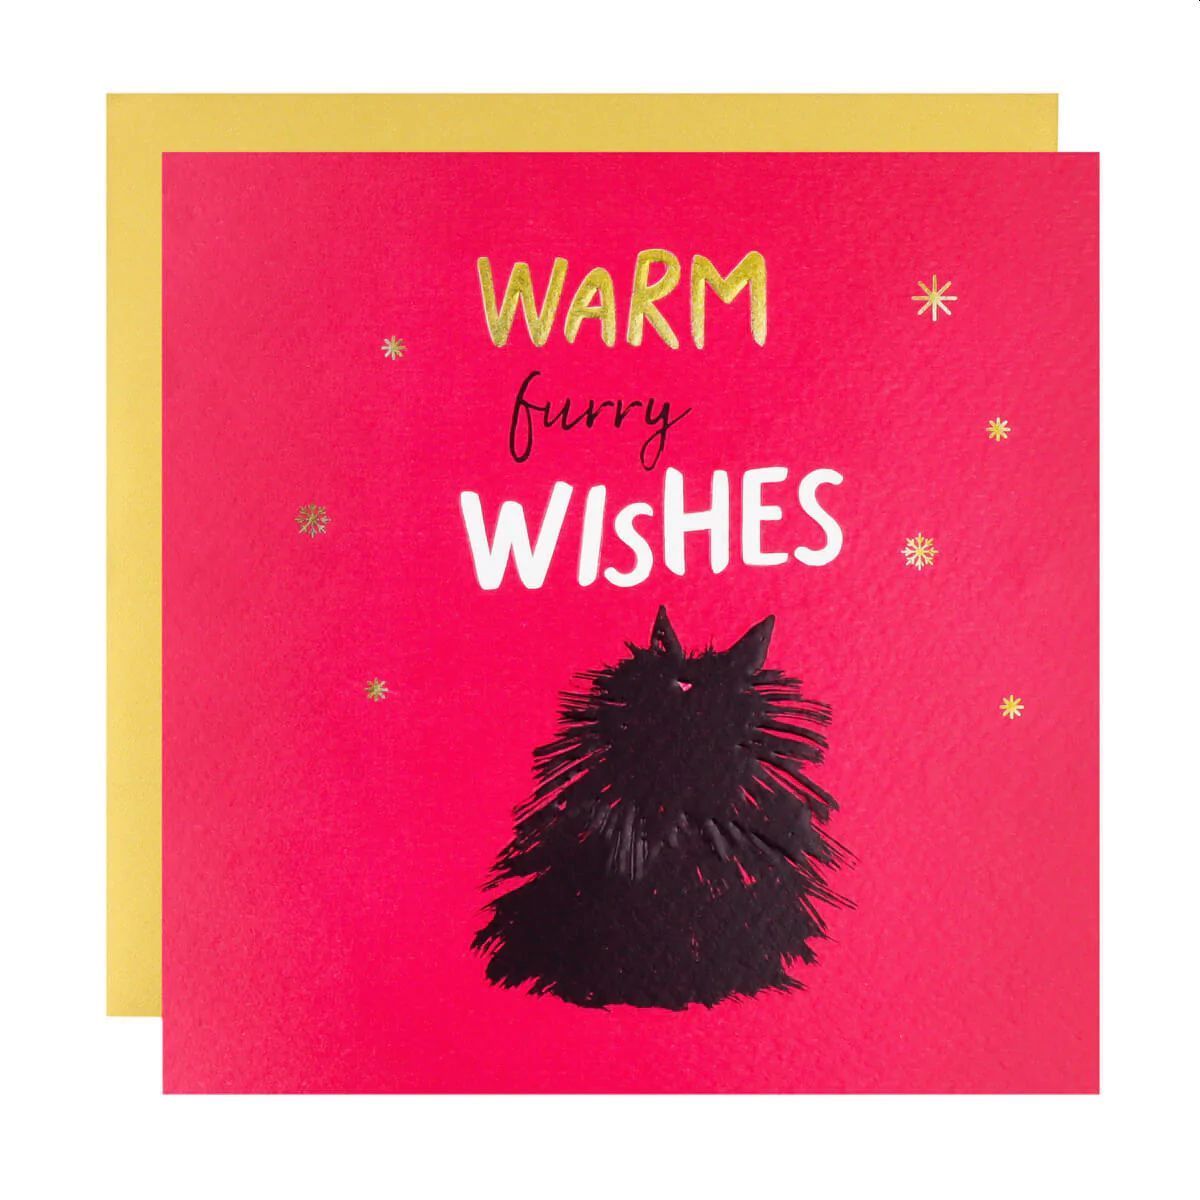 Warm Furry Wishes Charity Card Pack